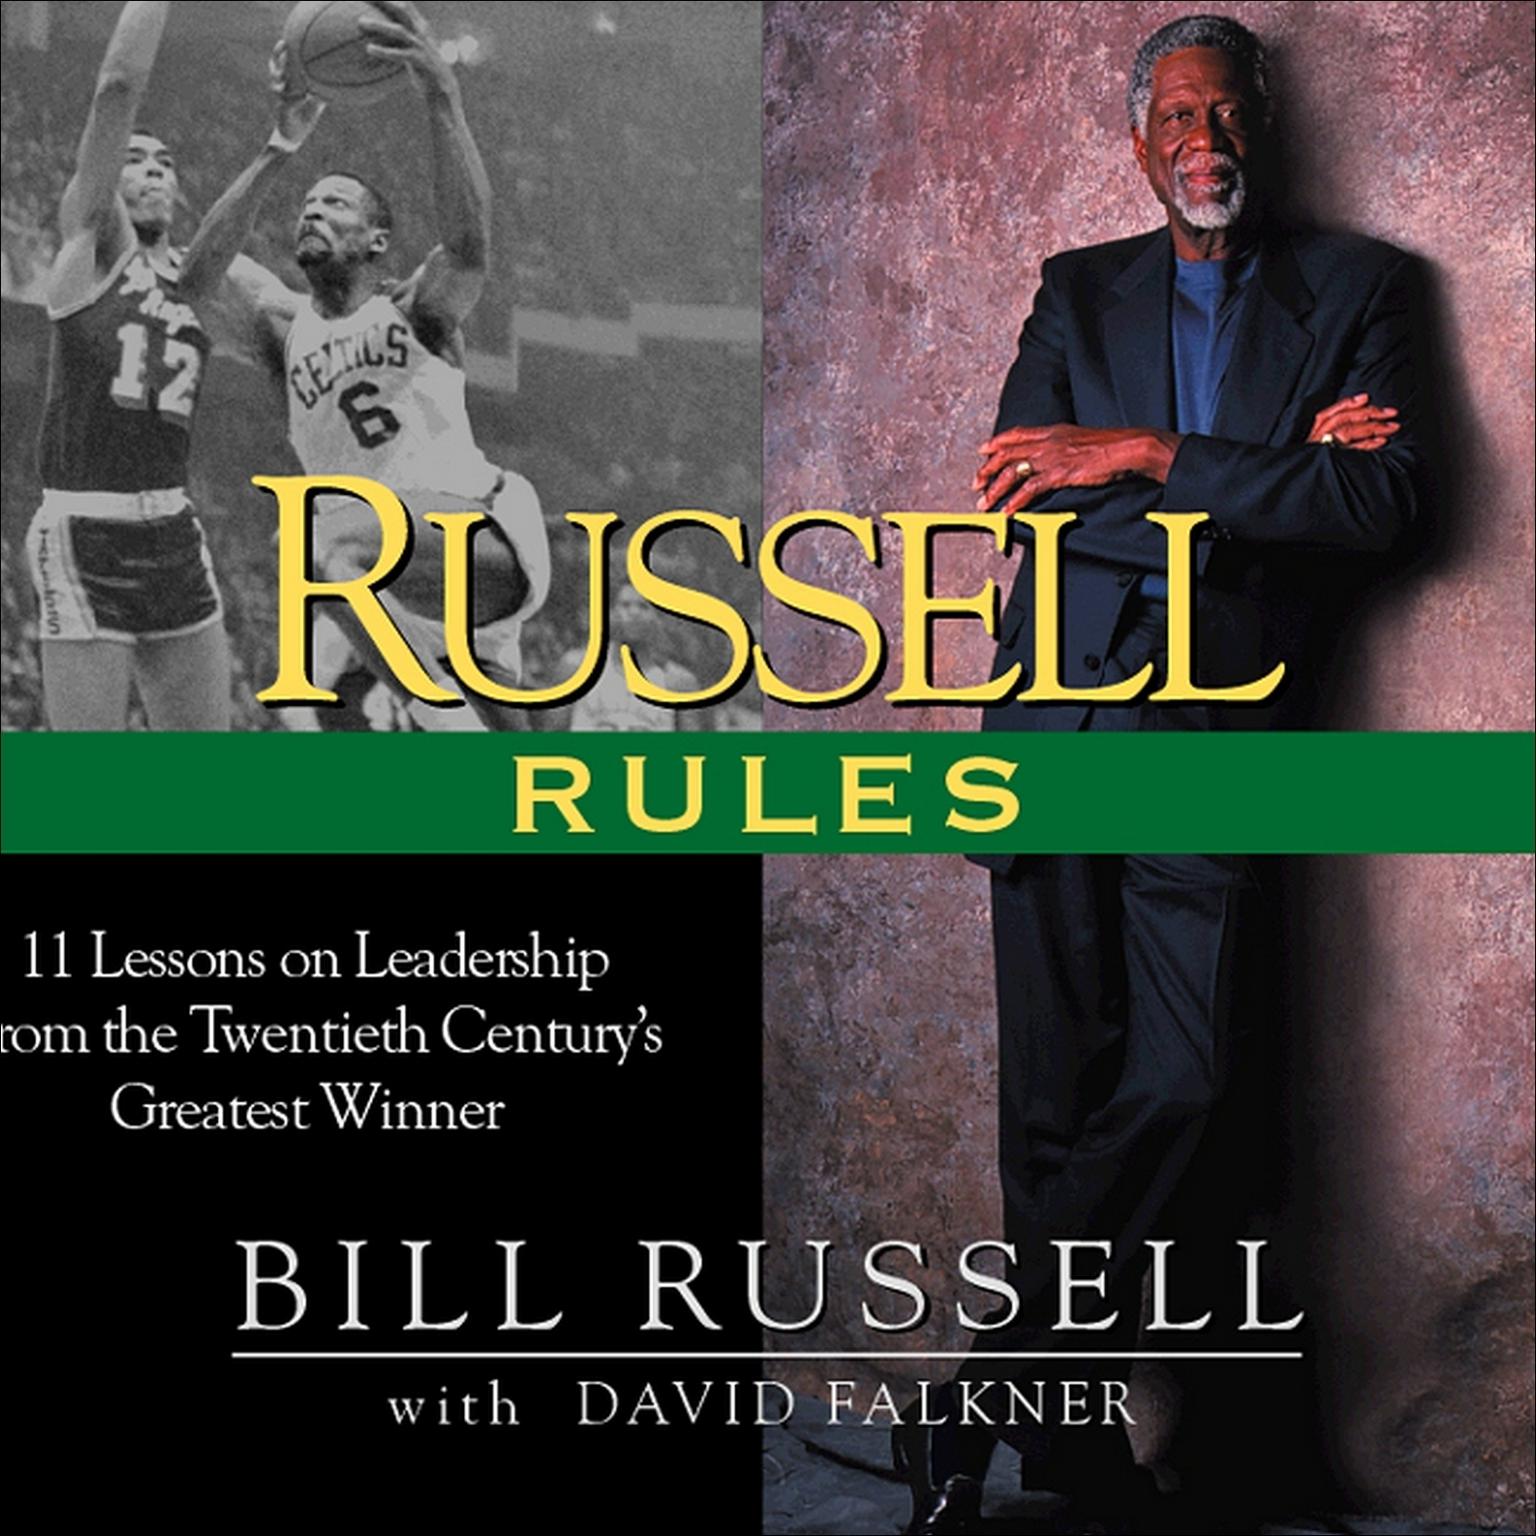 Russell Rules (Abridged): 11 Lessons on Leadership from the 20th Centurys Greatest Champion Audiobook, by Bill Russell